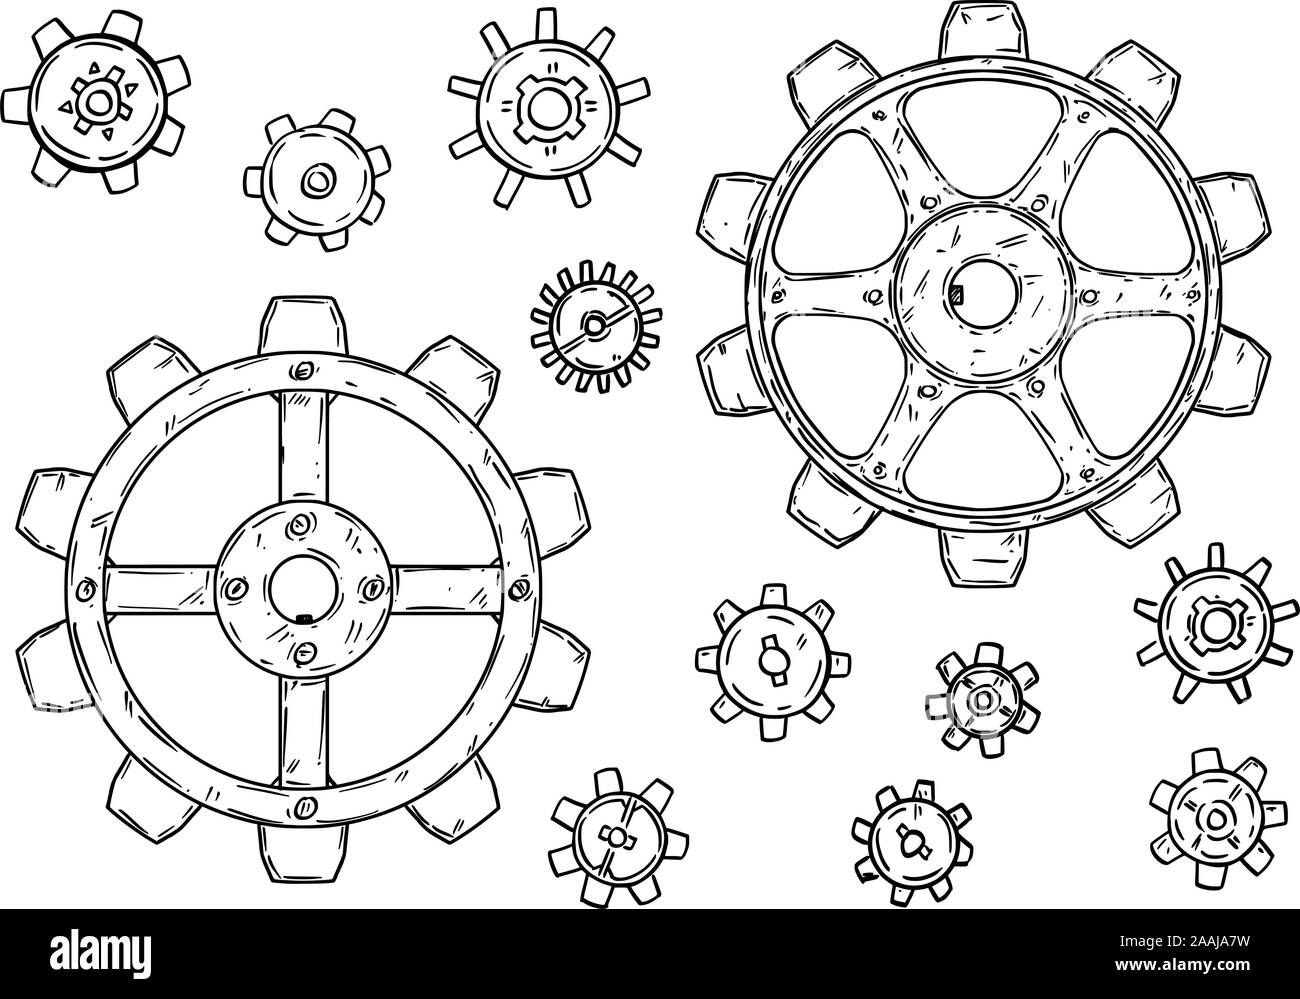 Vector drawing or illustration of set of cogwheels or gearwheels or toothed wheels in black on white background. Stock Vector